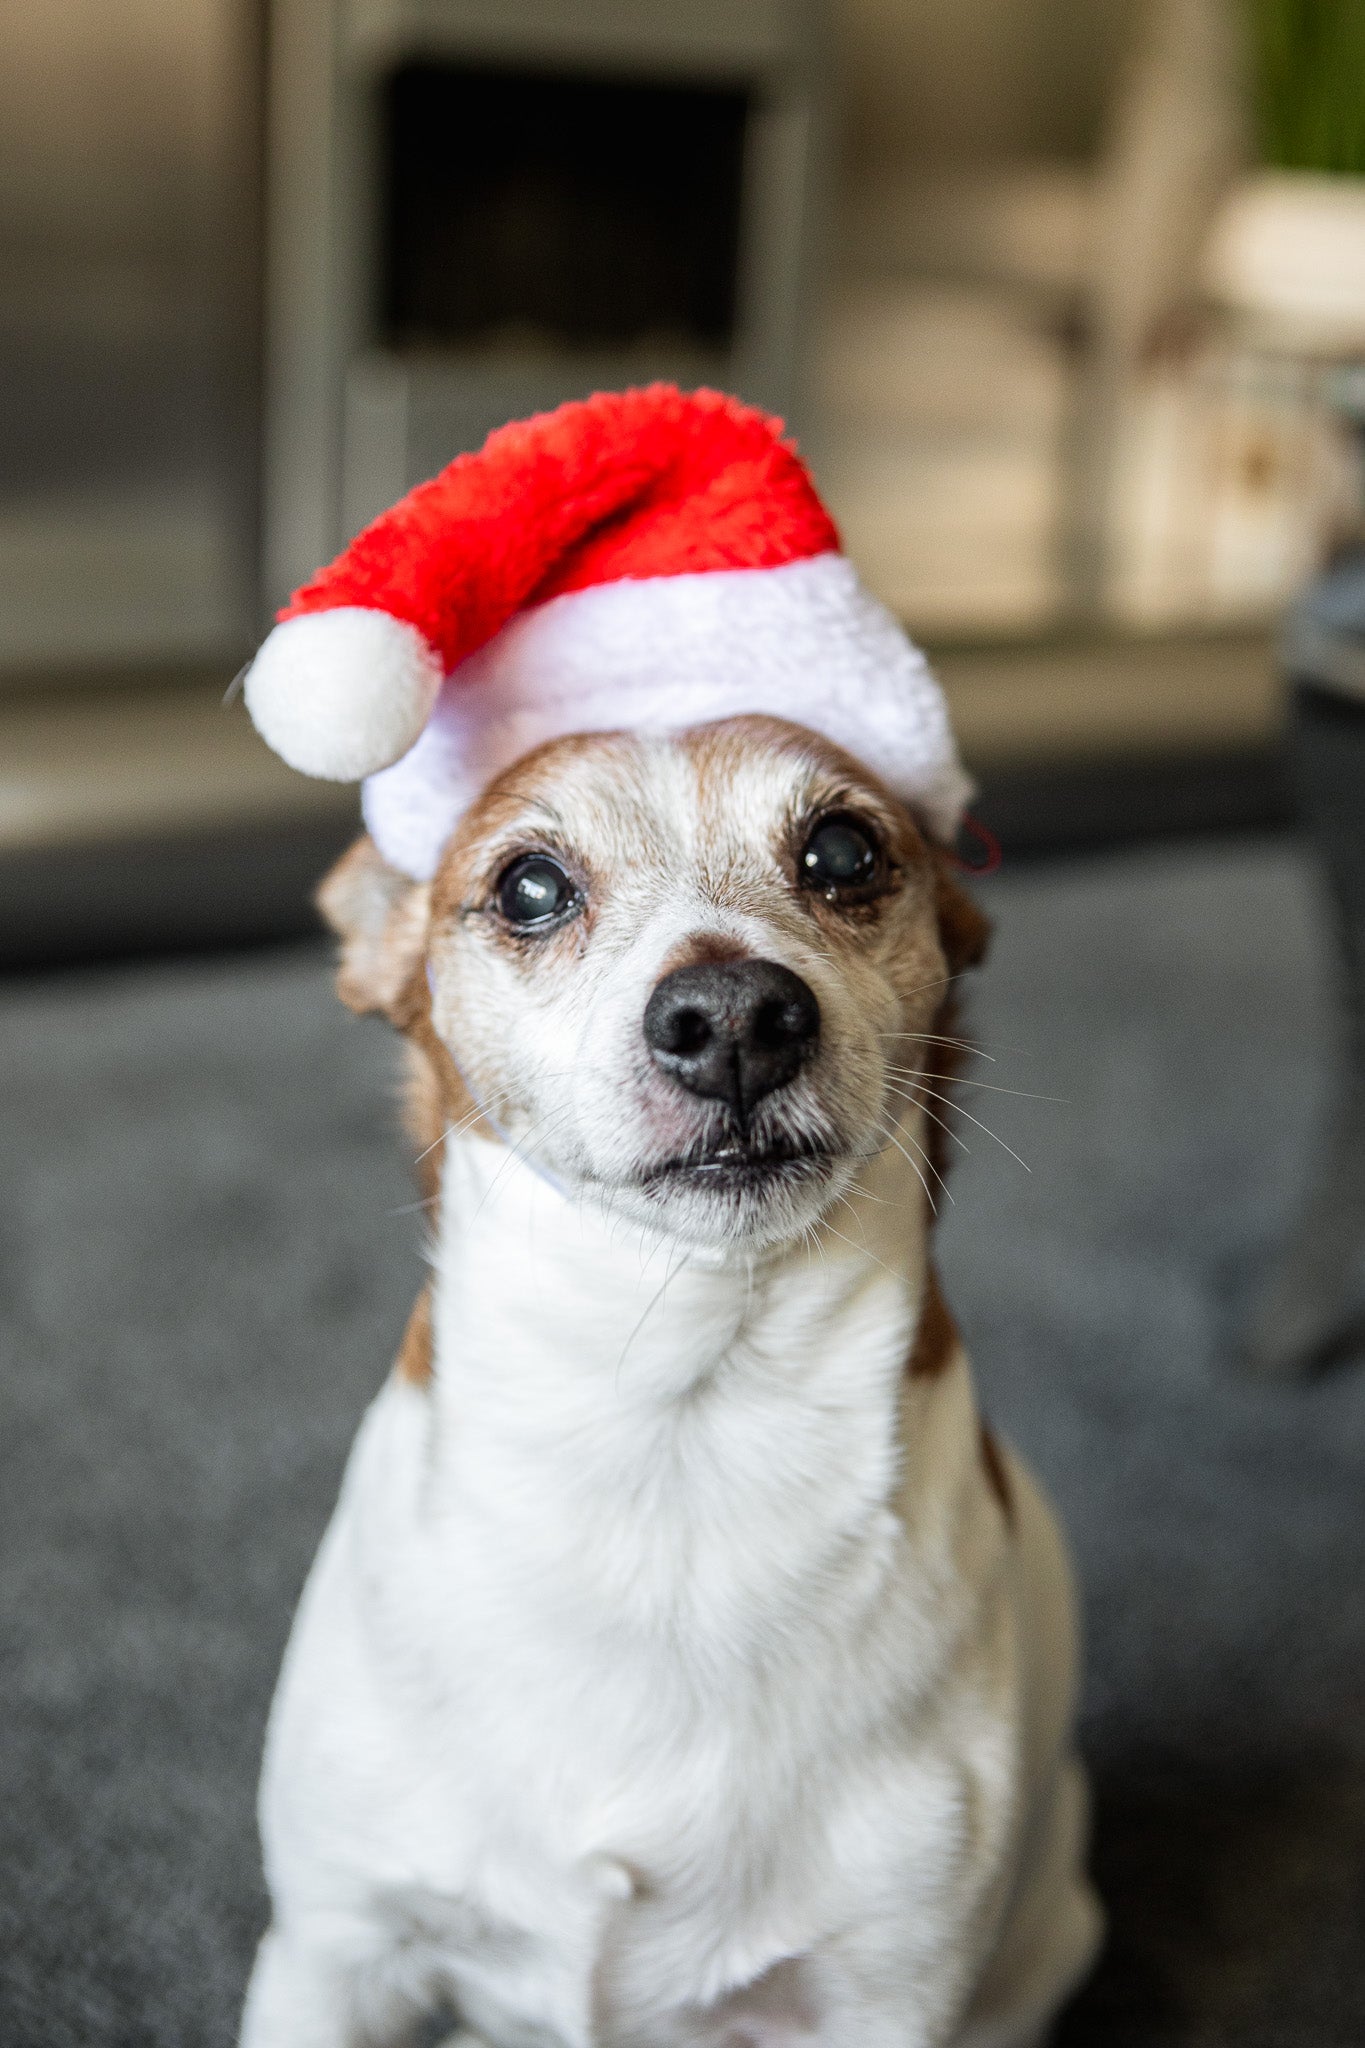 Christmas hats for your pooch